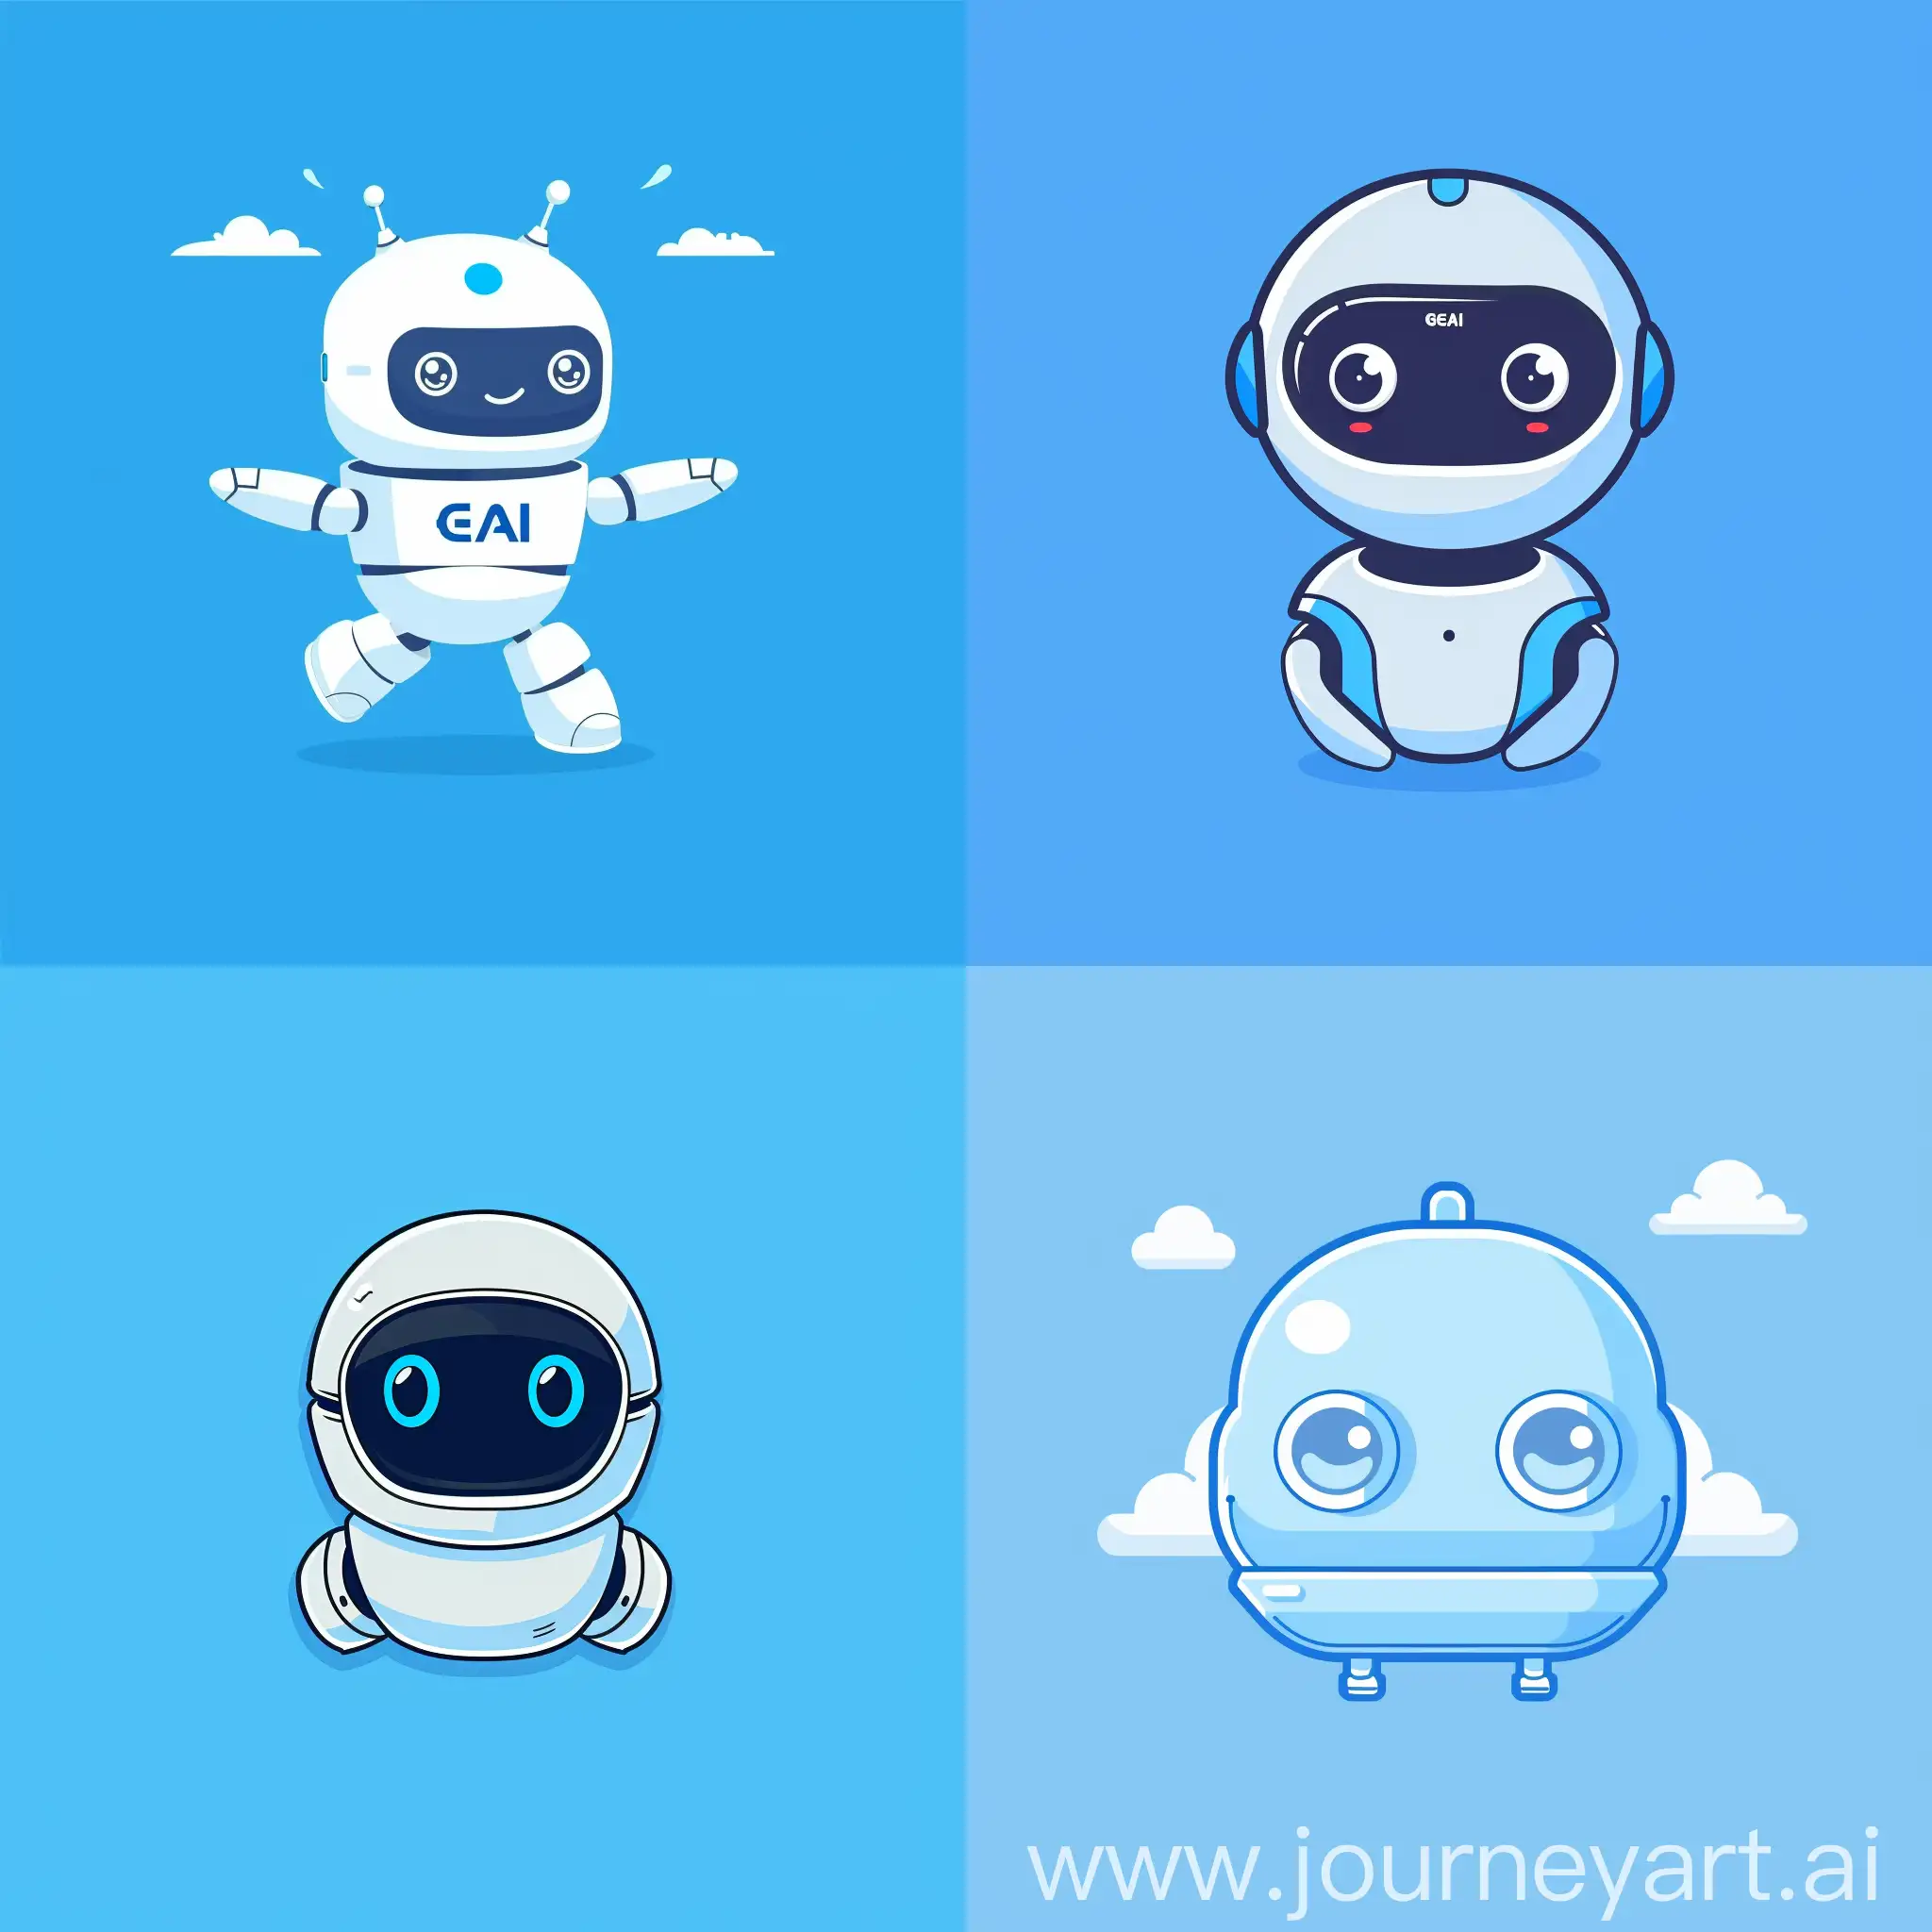 I want you to come up with a logo for my bot, here is the info about the bot, give me atleast 4 type of options and Use sky blue background only

Info: Build a large user base by offering GenAI tools and services directly on Telegram. Focused on quality service, great assistance, and excellent branding :